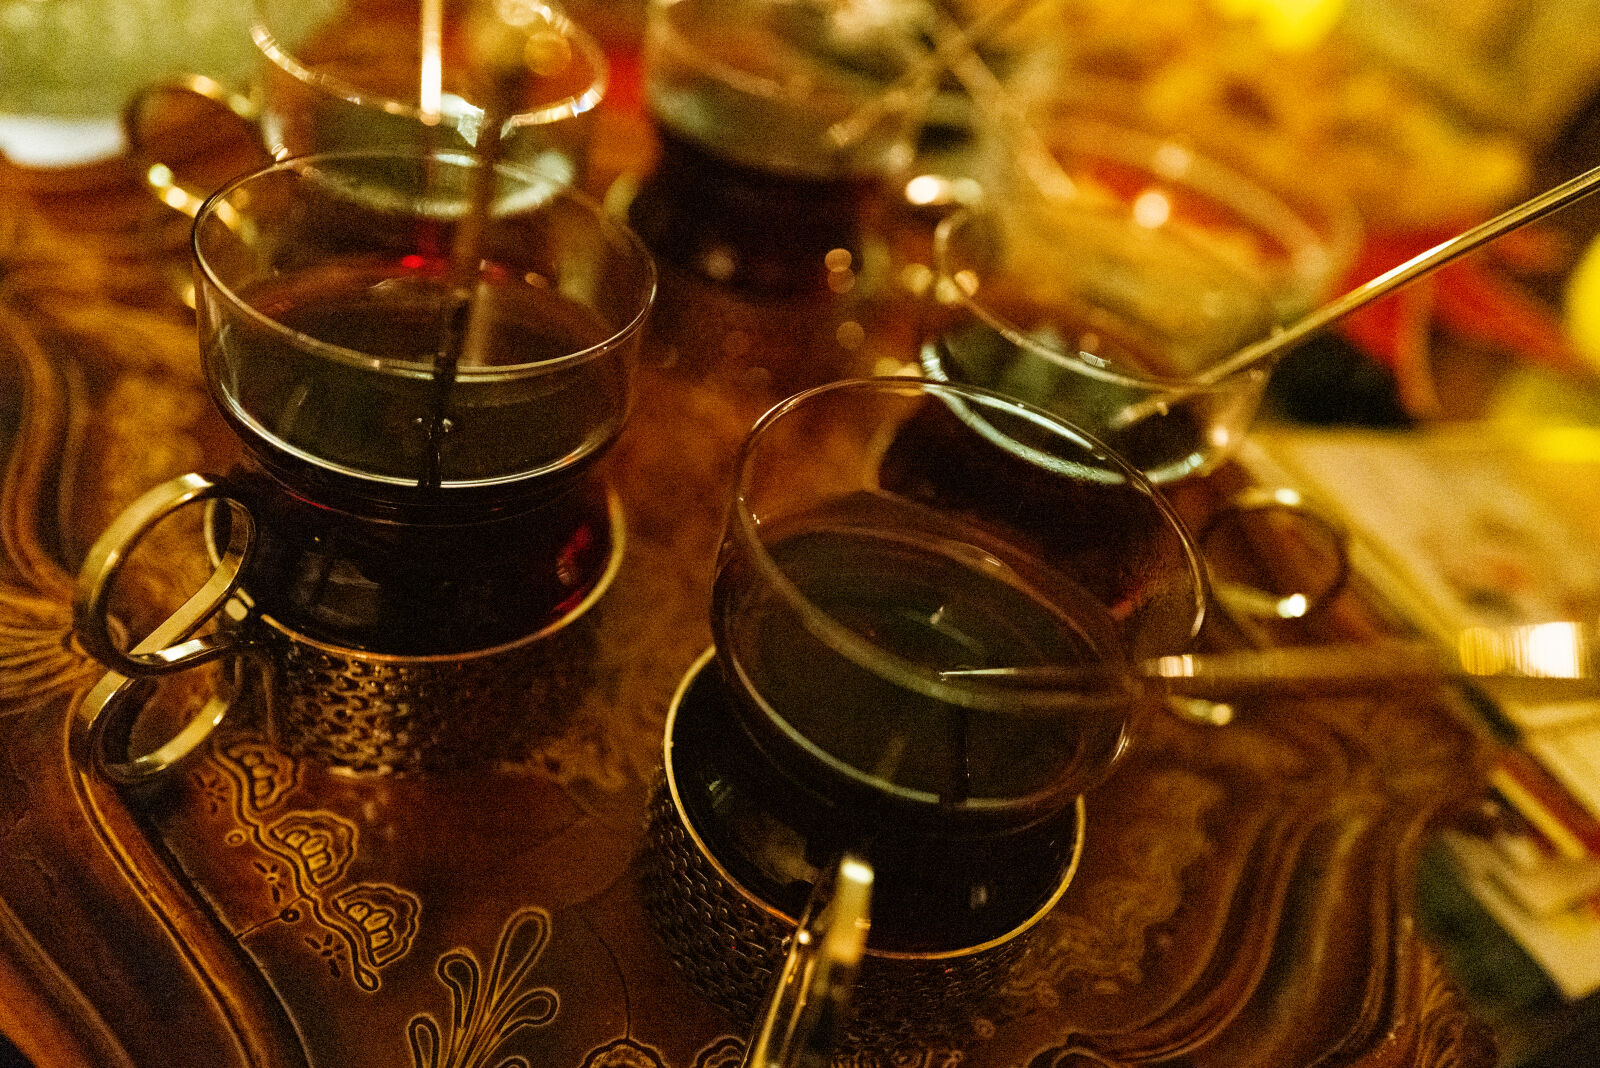 SUMMILUX 1:1.7/28 ASPH. sample photo. Mulled wine photography